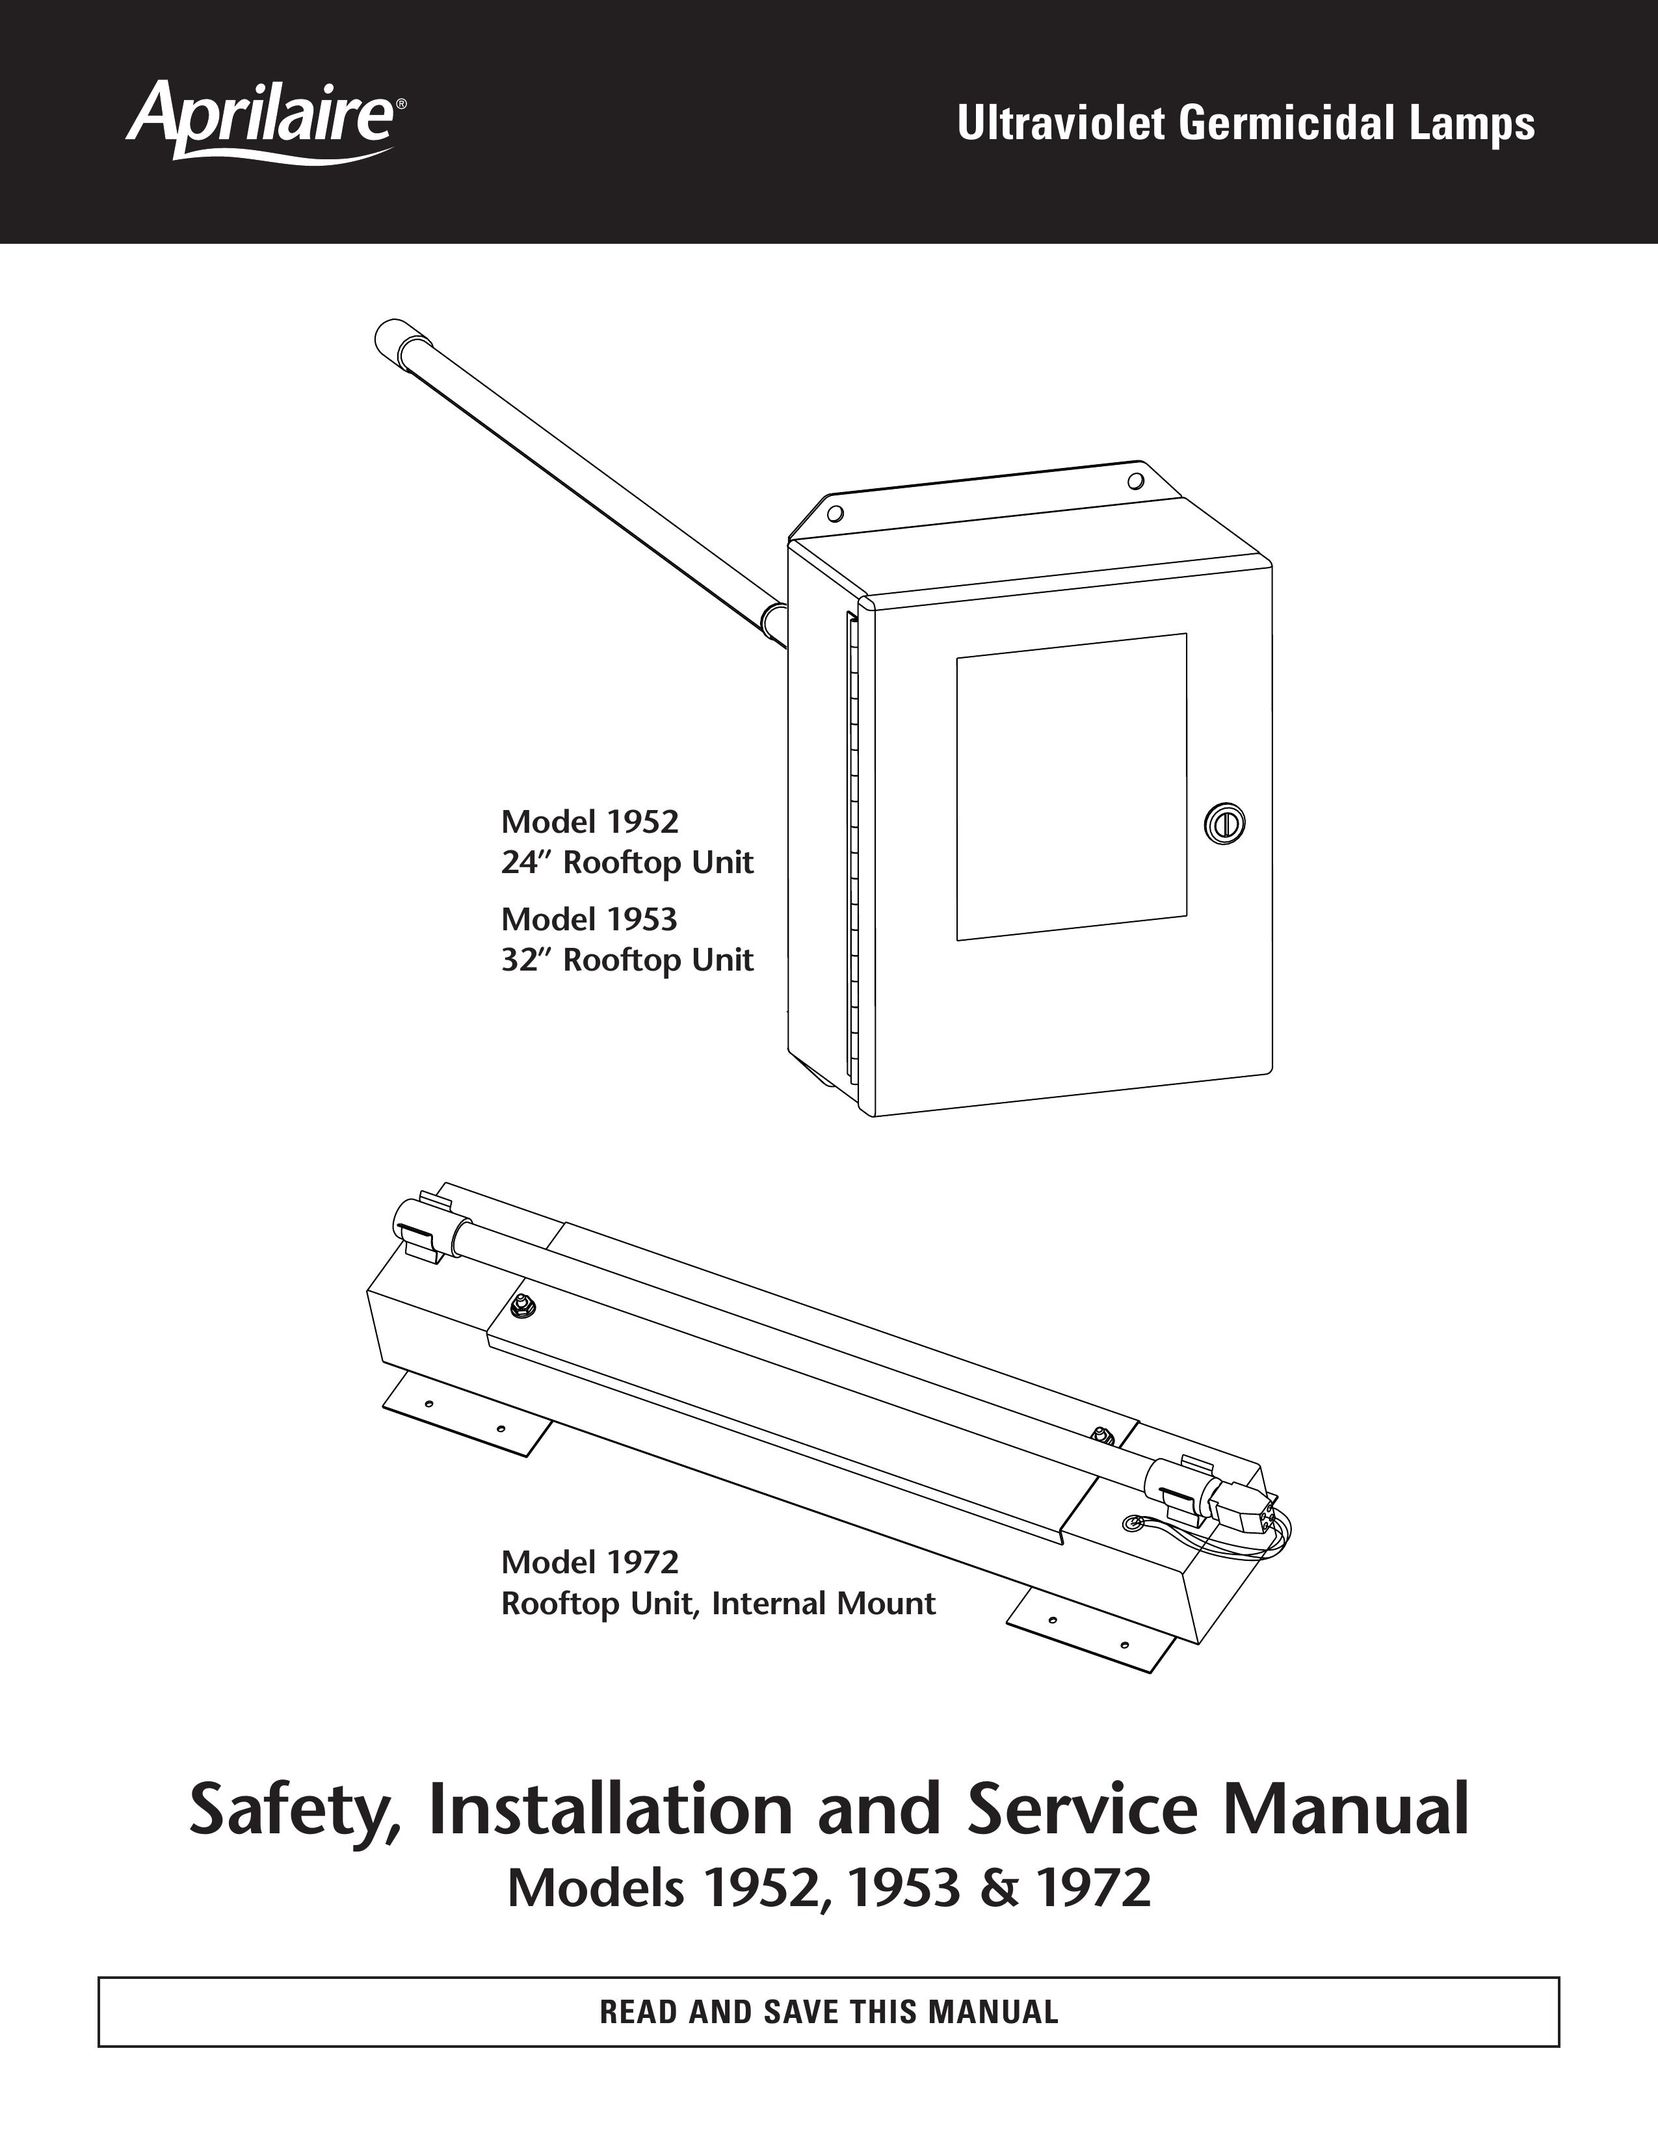 Aprilaire 1952 Humidifier User Manual